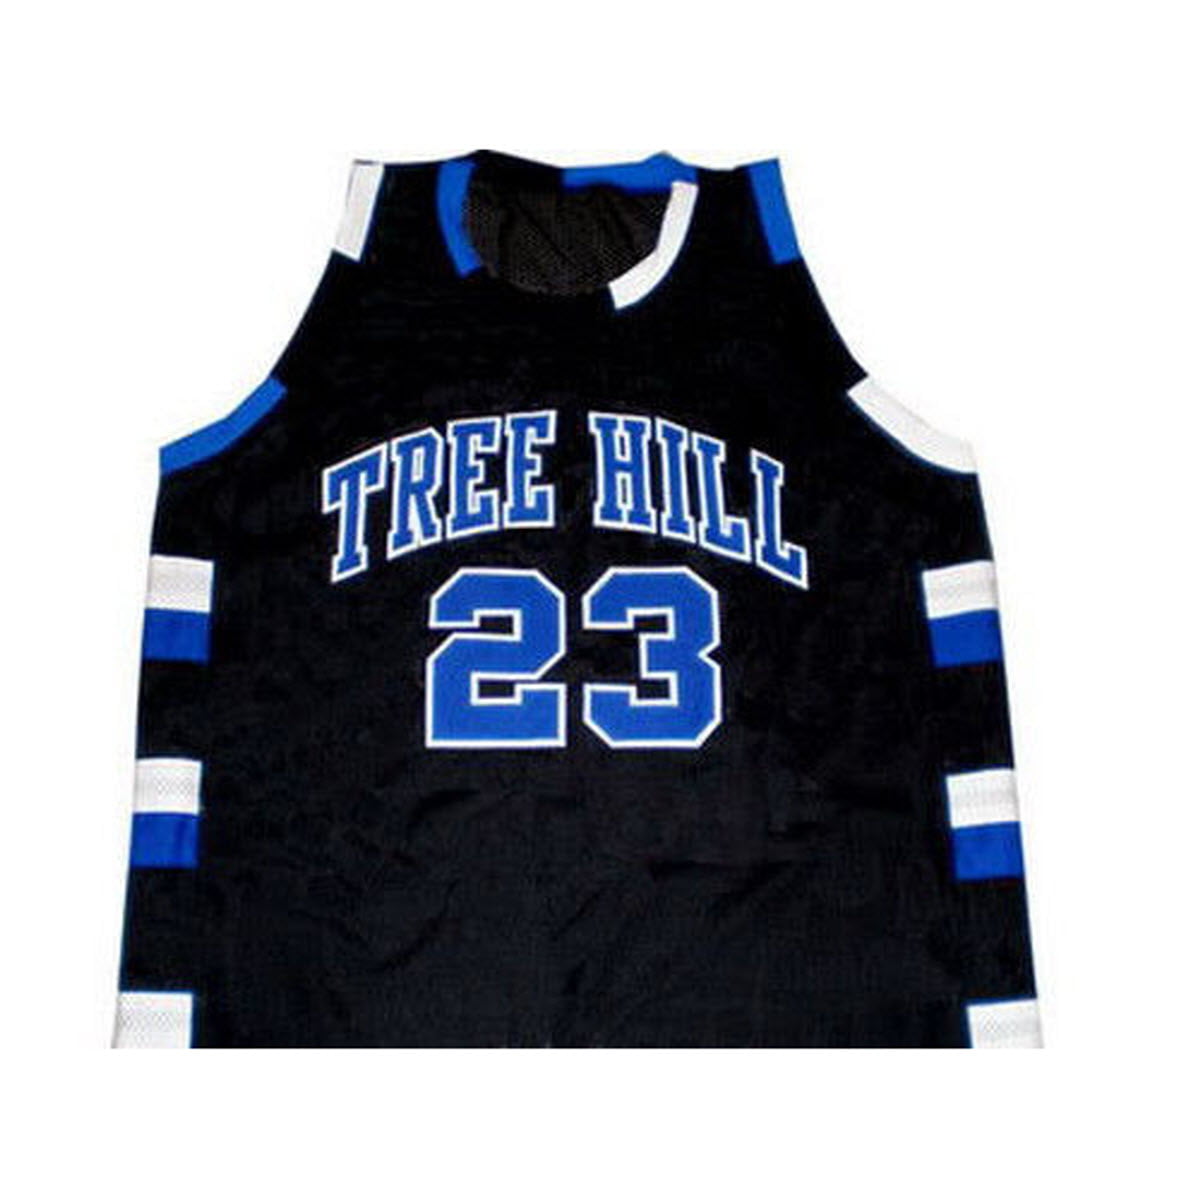 Gift for 11oz One Tree Hill Tv Show Gift Merchandise Accessories Pin Poster Shirt Nathan Scott One Tree Hill Ravens 23 Jersey Coffee Mug Cup White 